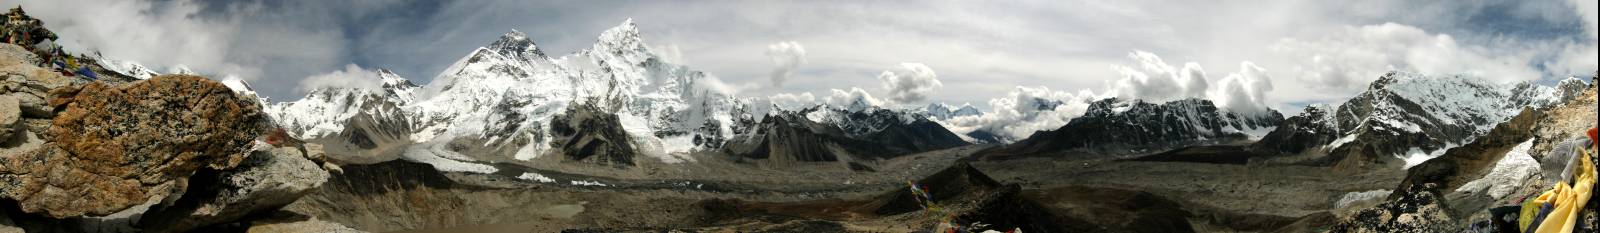 Day 10: View from Kala Pattar (panorama)